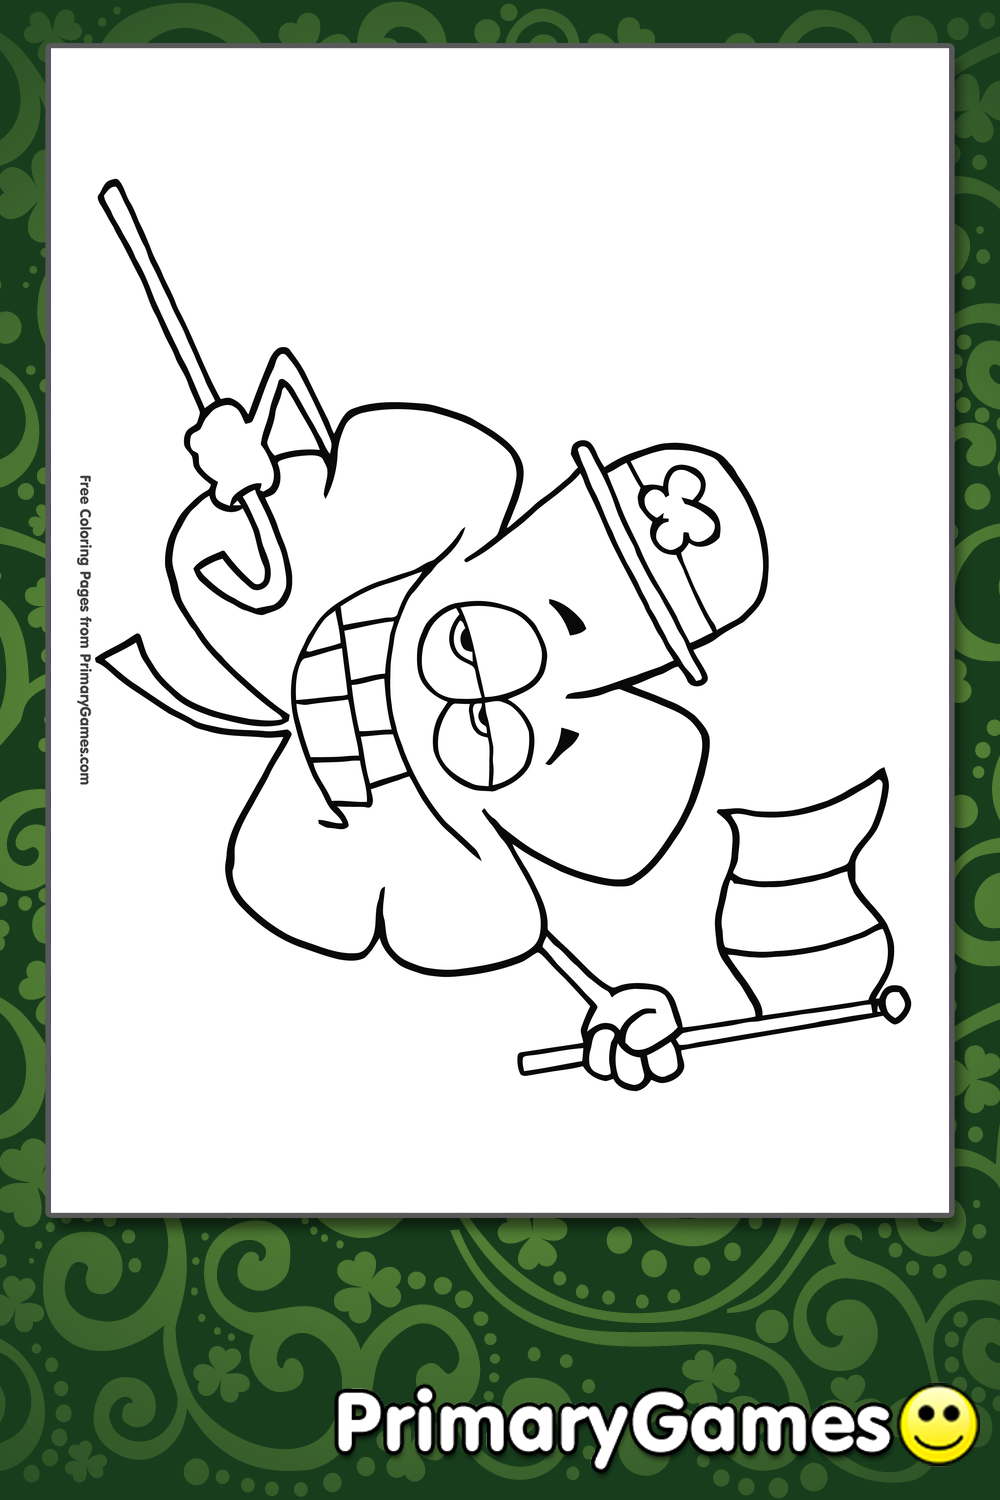 Shamrock with irish flag coloring page â free printable pdf from